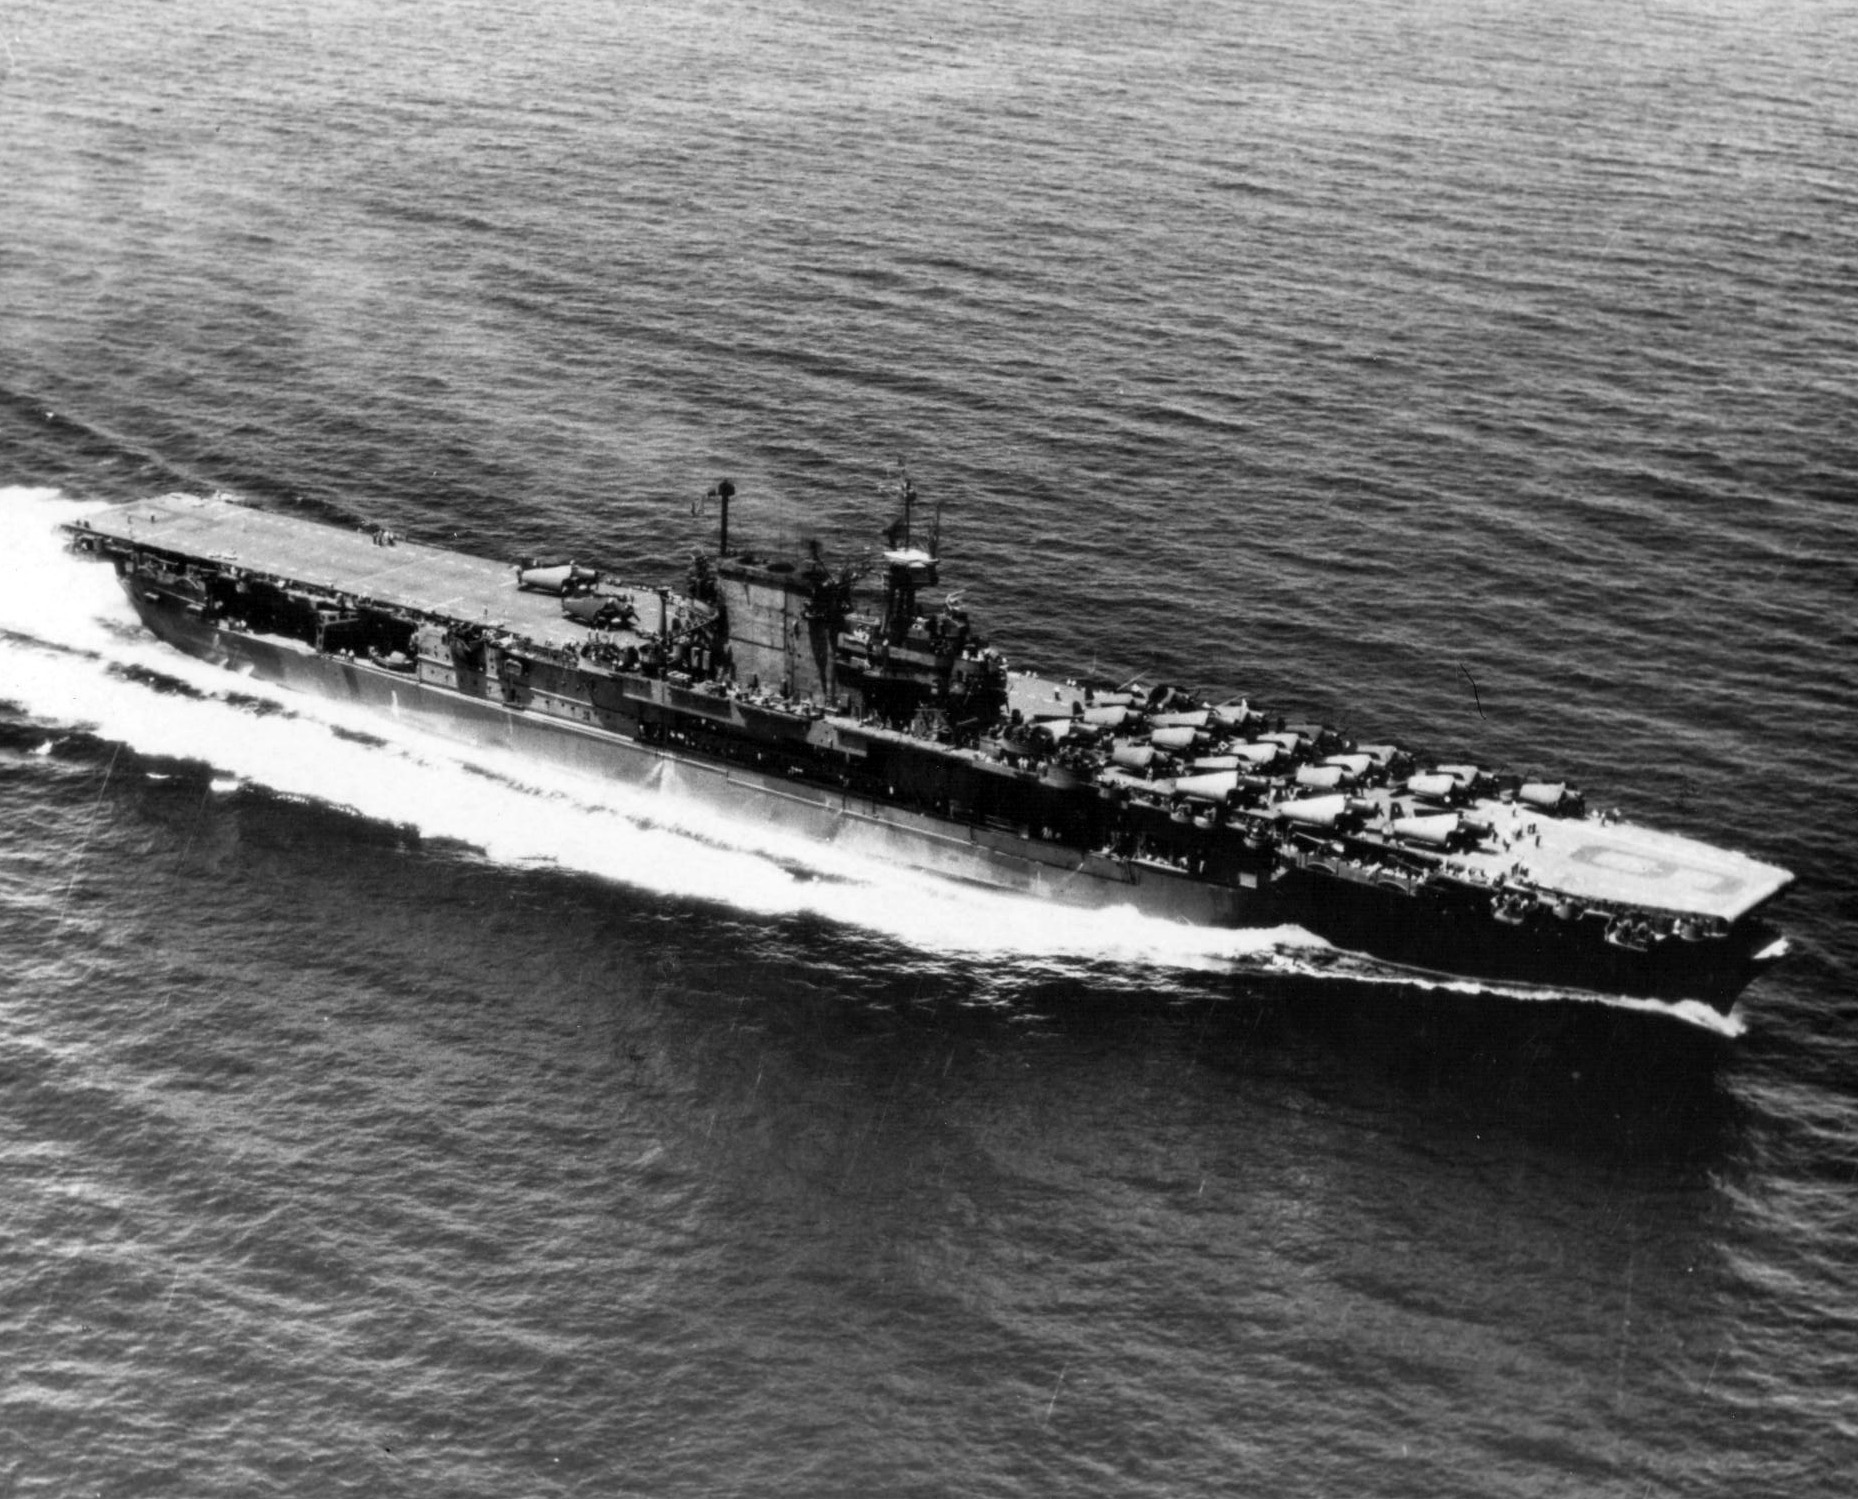 USS Enterprise steaming in the Caribbean en route New York, United States, 12 Oct 1945